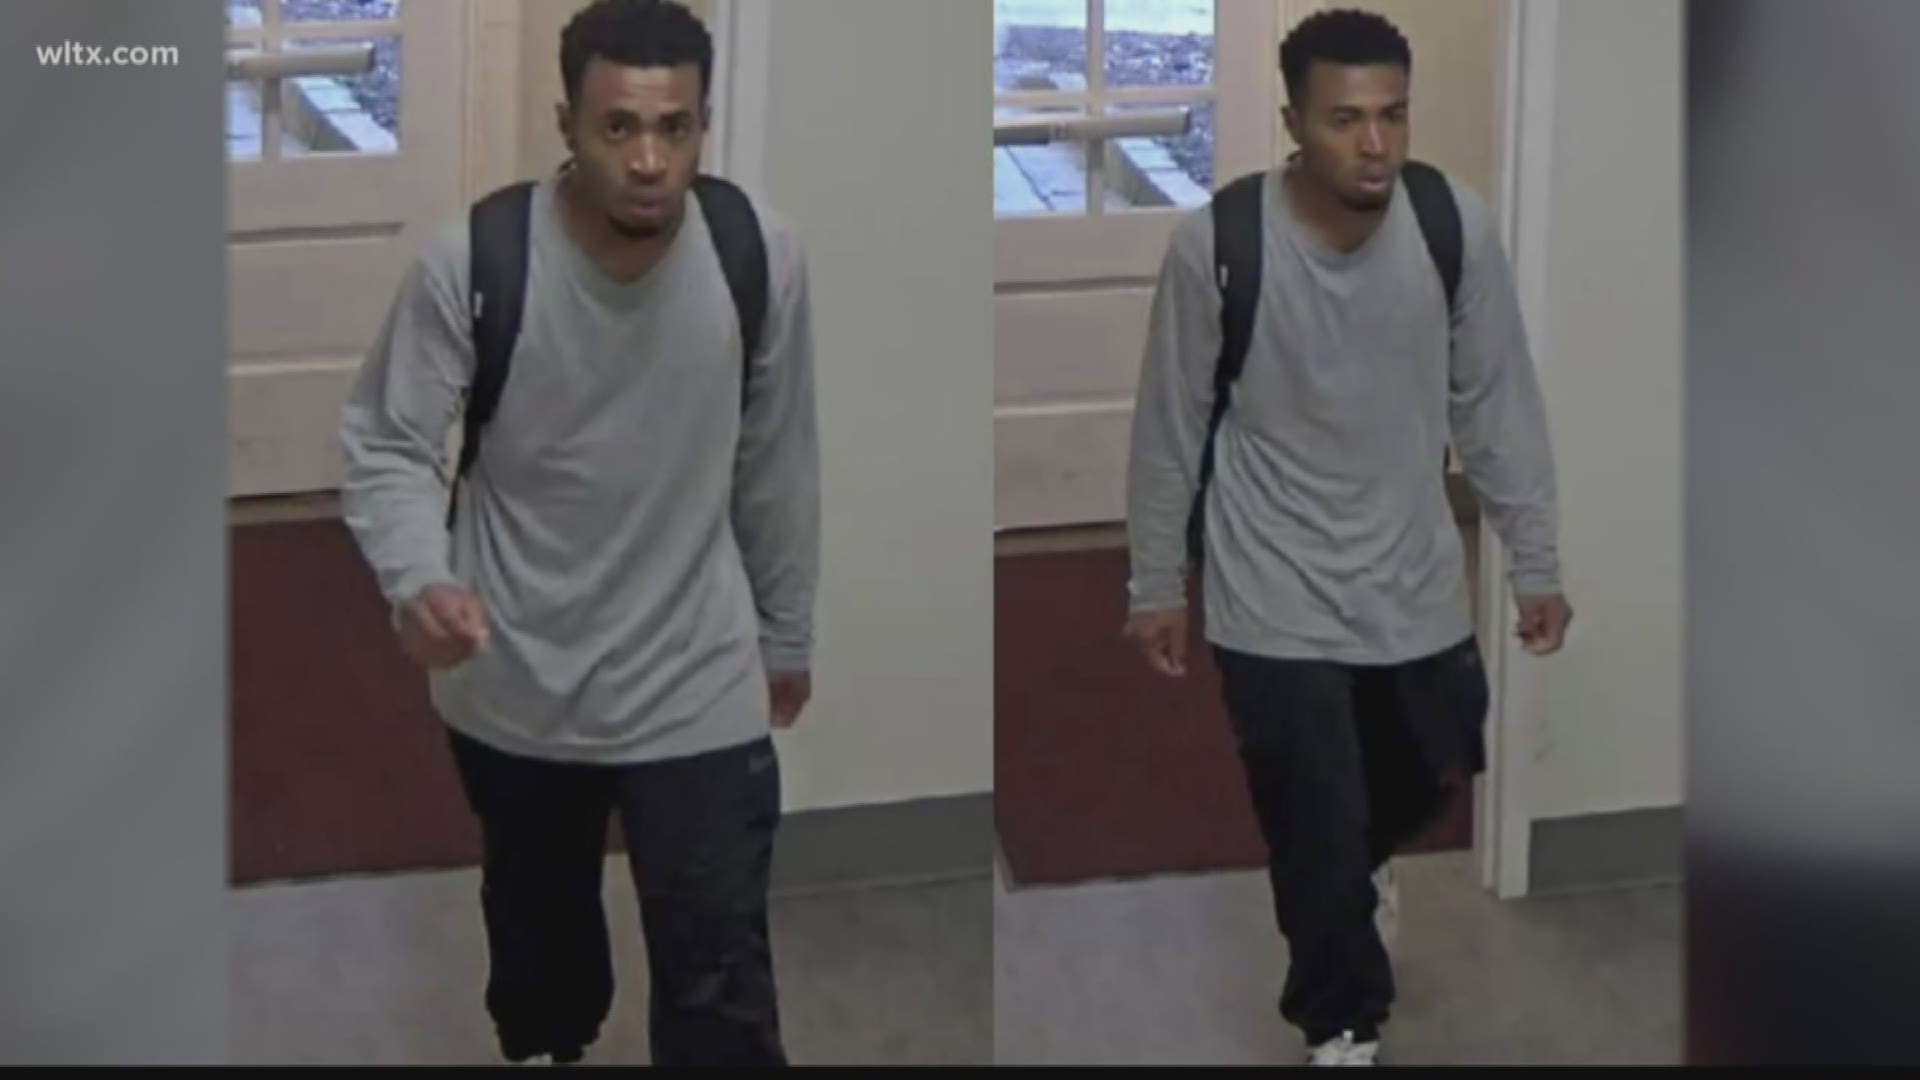 Police have arrested a suspect who they say attempted to fondle University of South Carolina students in campus bathrooms.